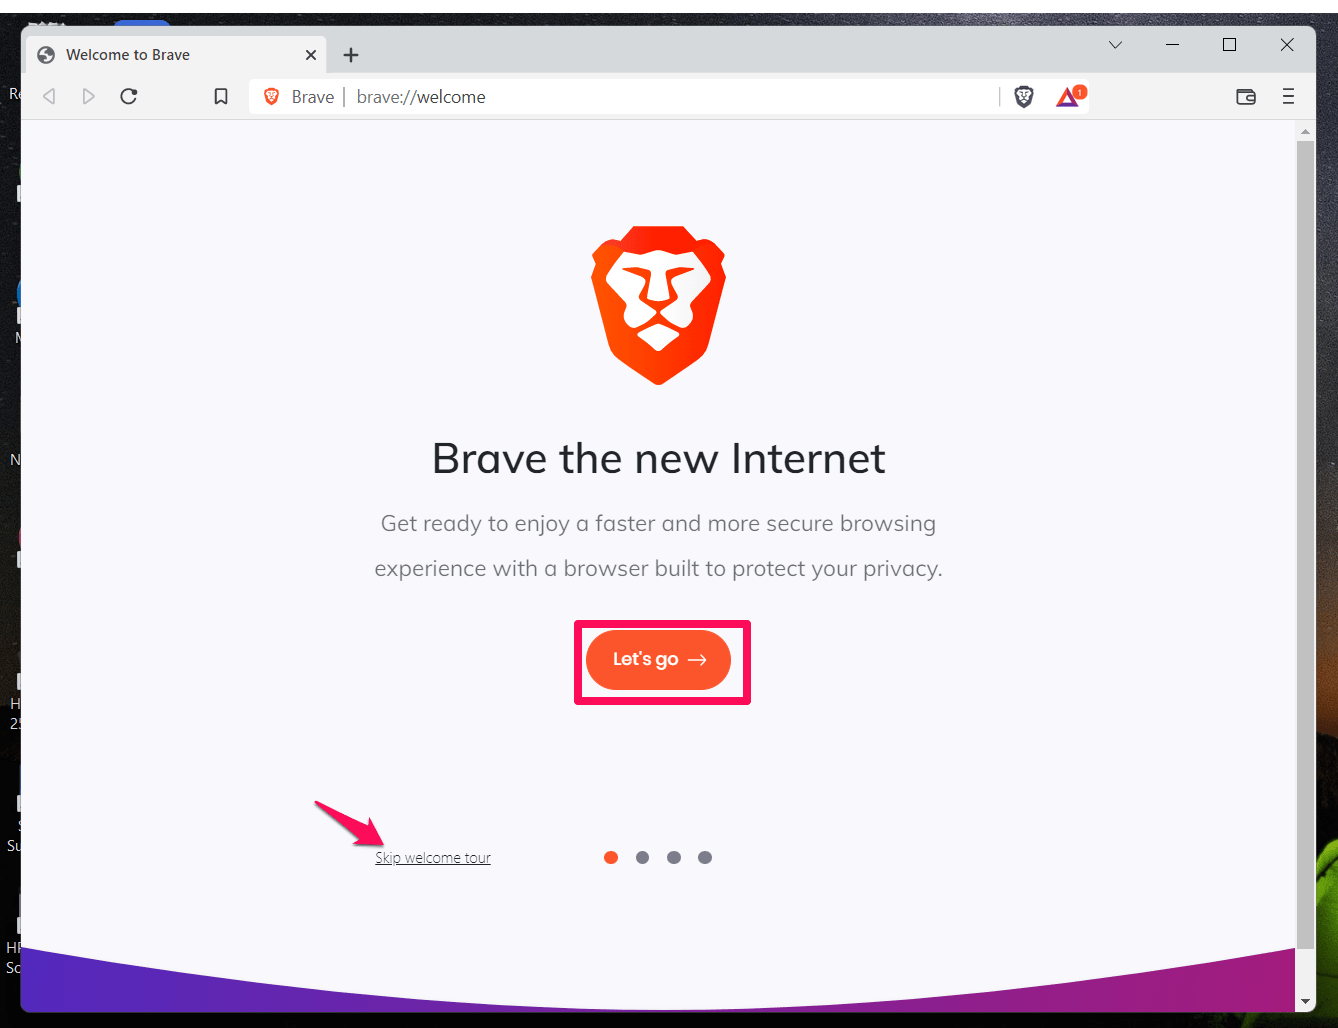 Skip Welcome Tour on Brave Browser